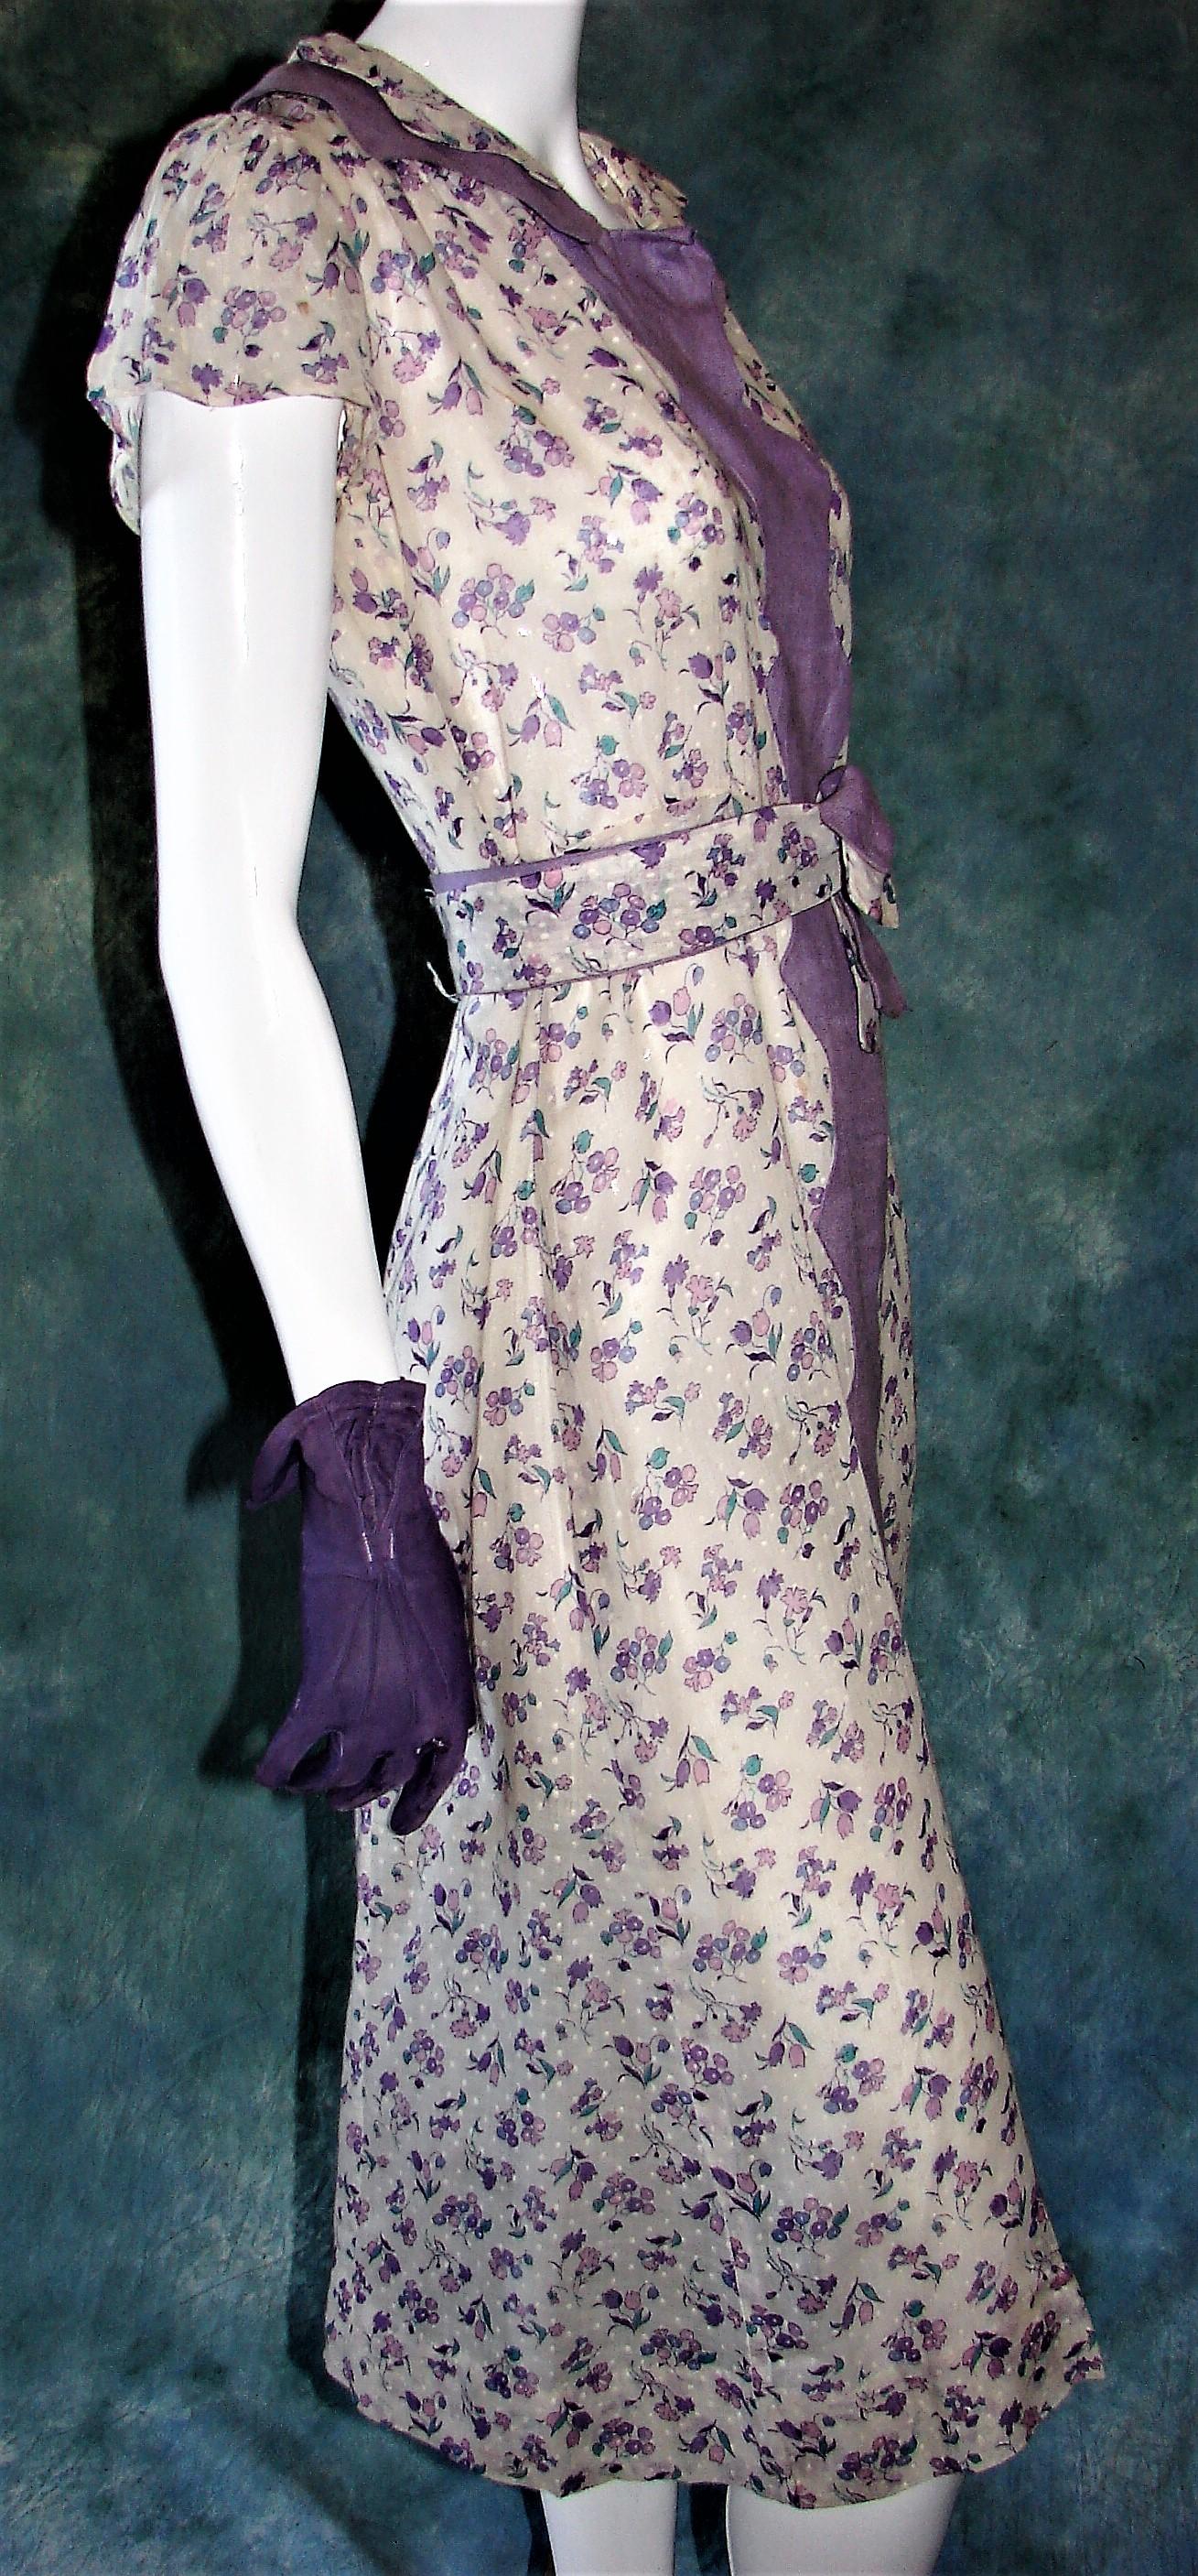 Vintage 1920s Ladies Floral Print Dress In A Linen Swiss Dotted Fabric